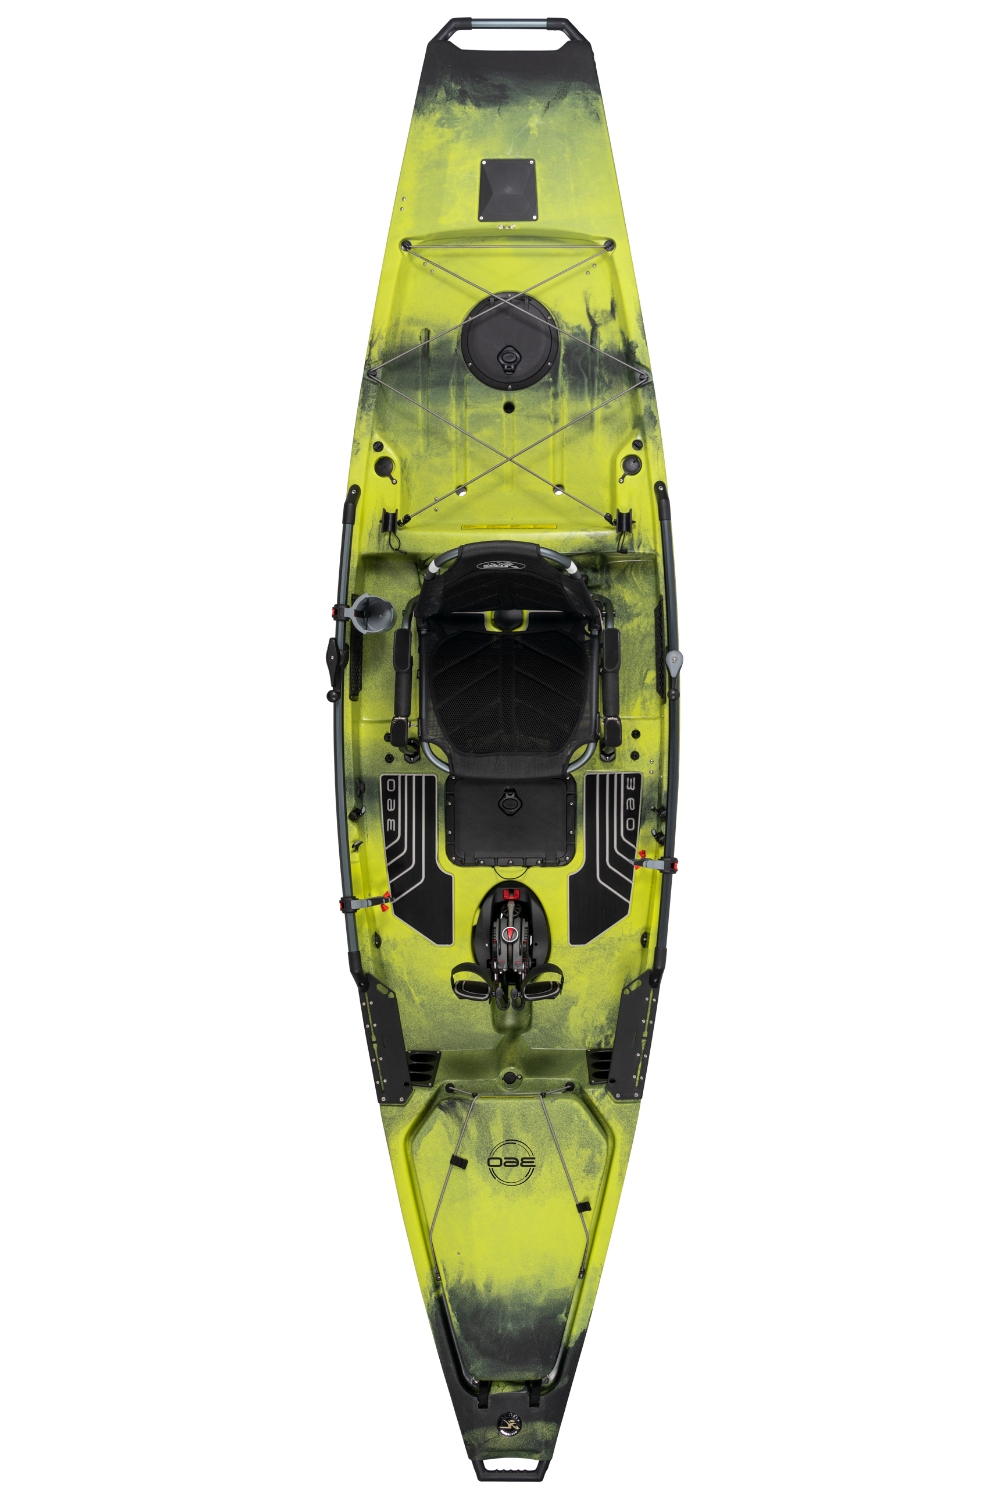 Hobie Mirage Pro Angler 14 360 Drive Technology Seagrass Camo